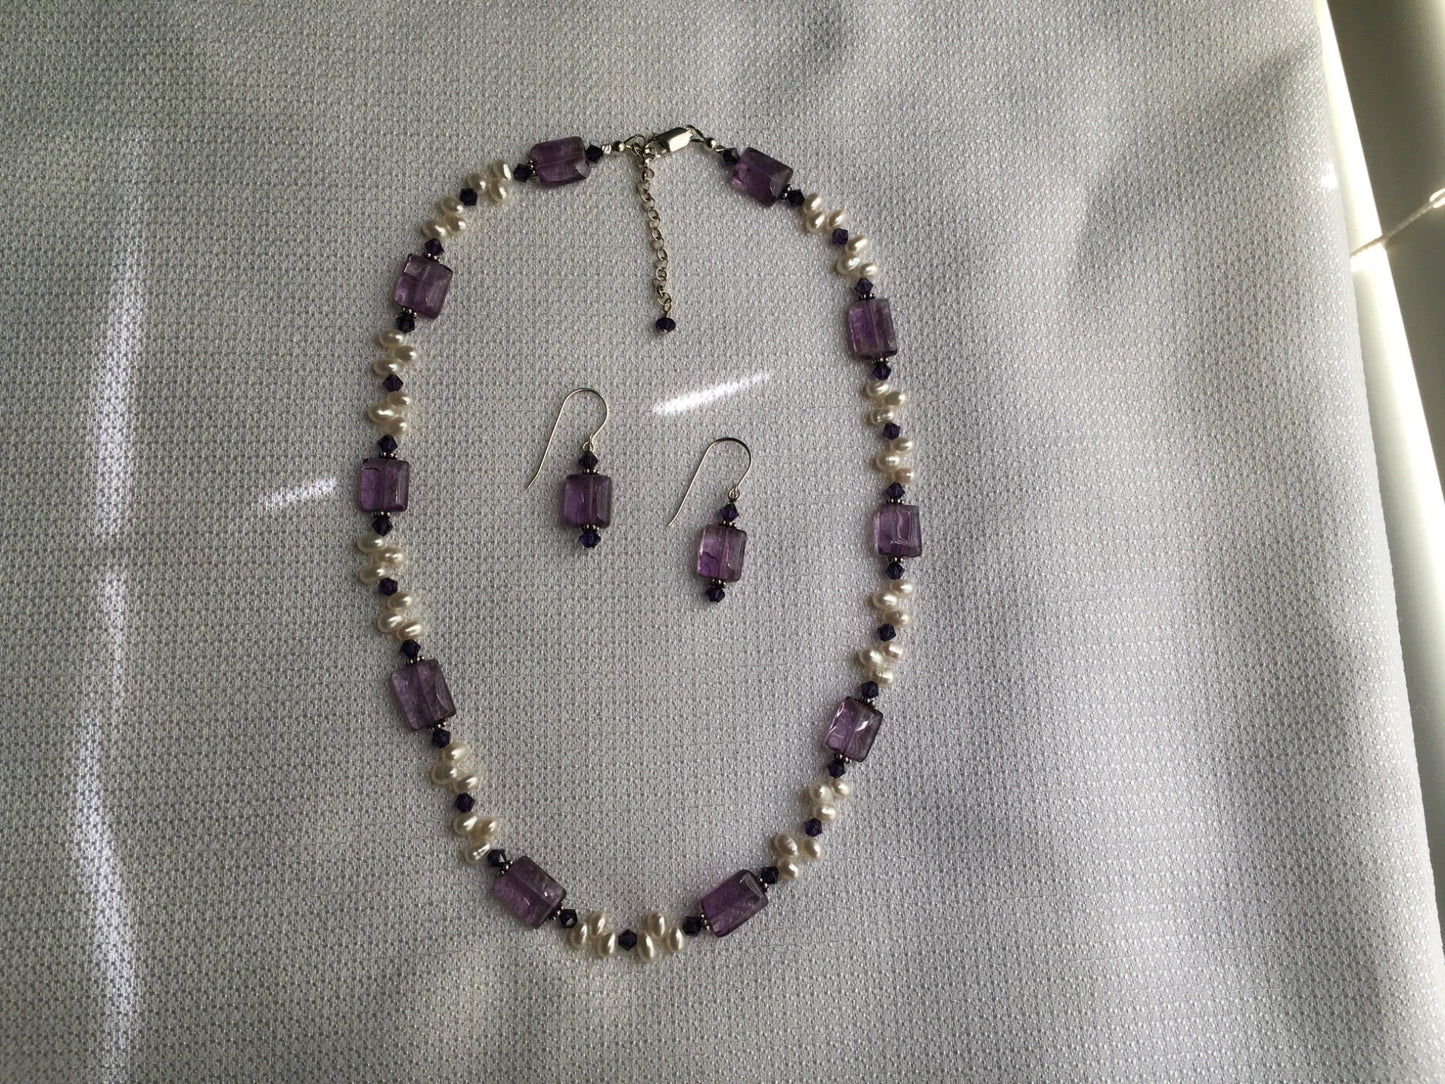 Amethyst, Fresh Water Pearls, Crystals and Stirling Silver Necklace and Earring Set - 2